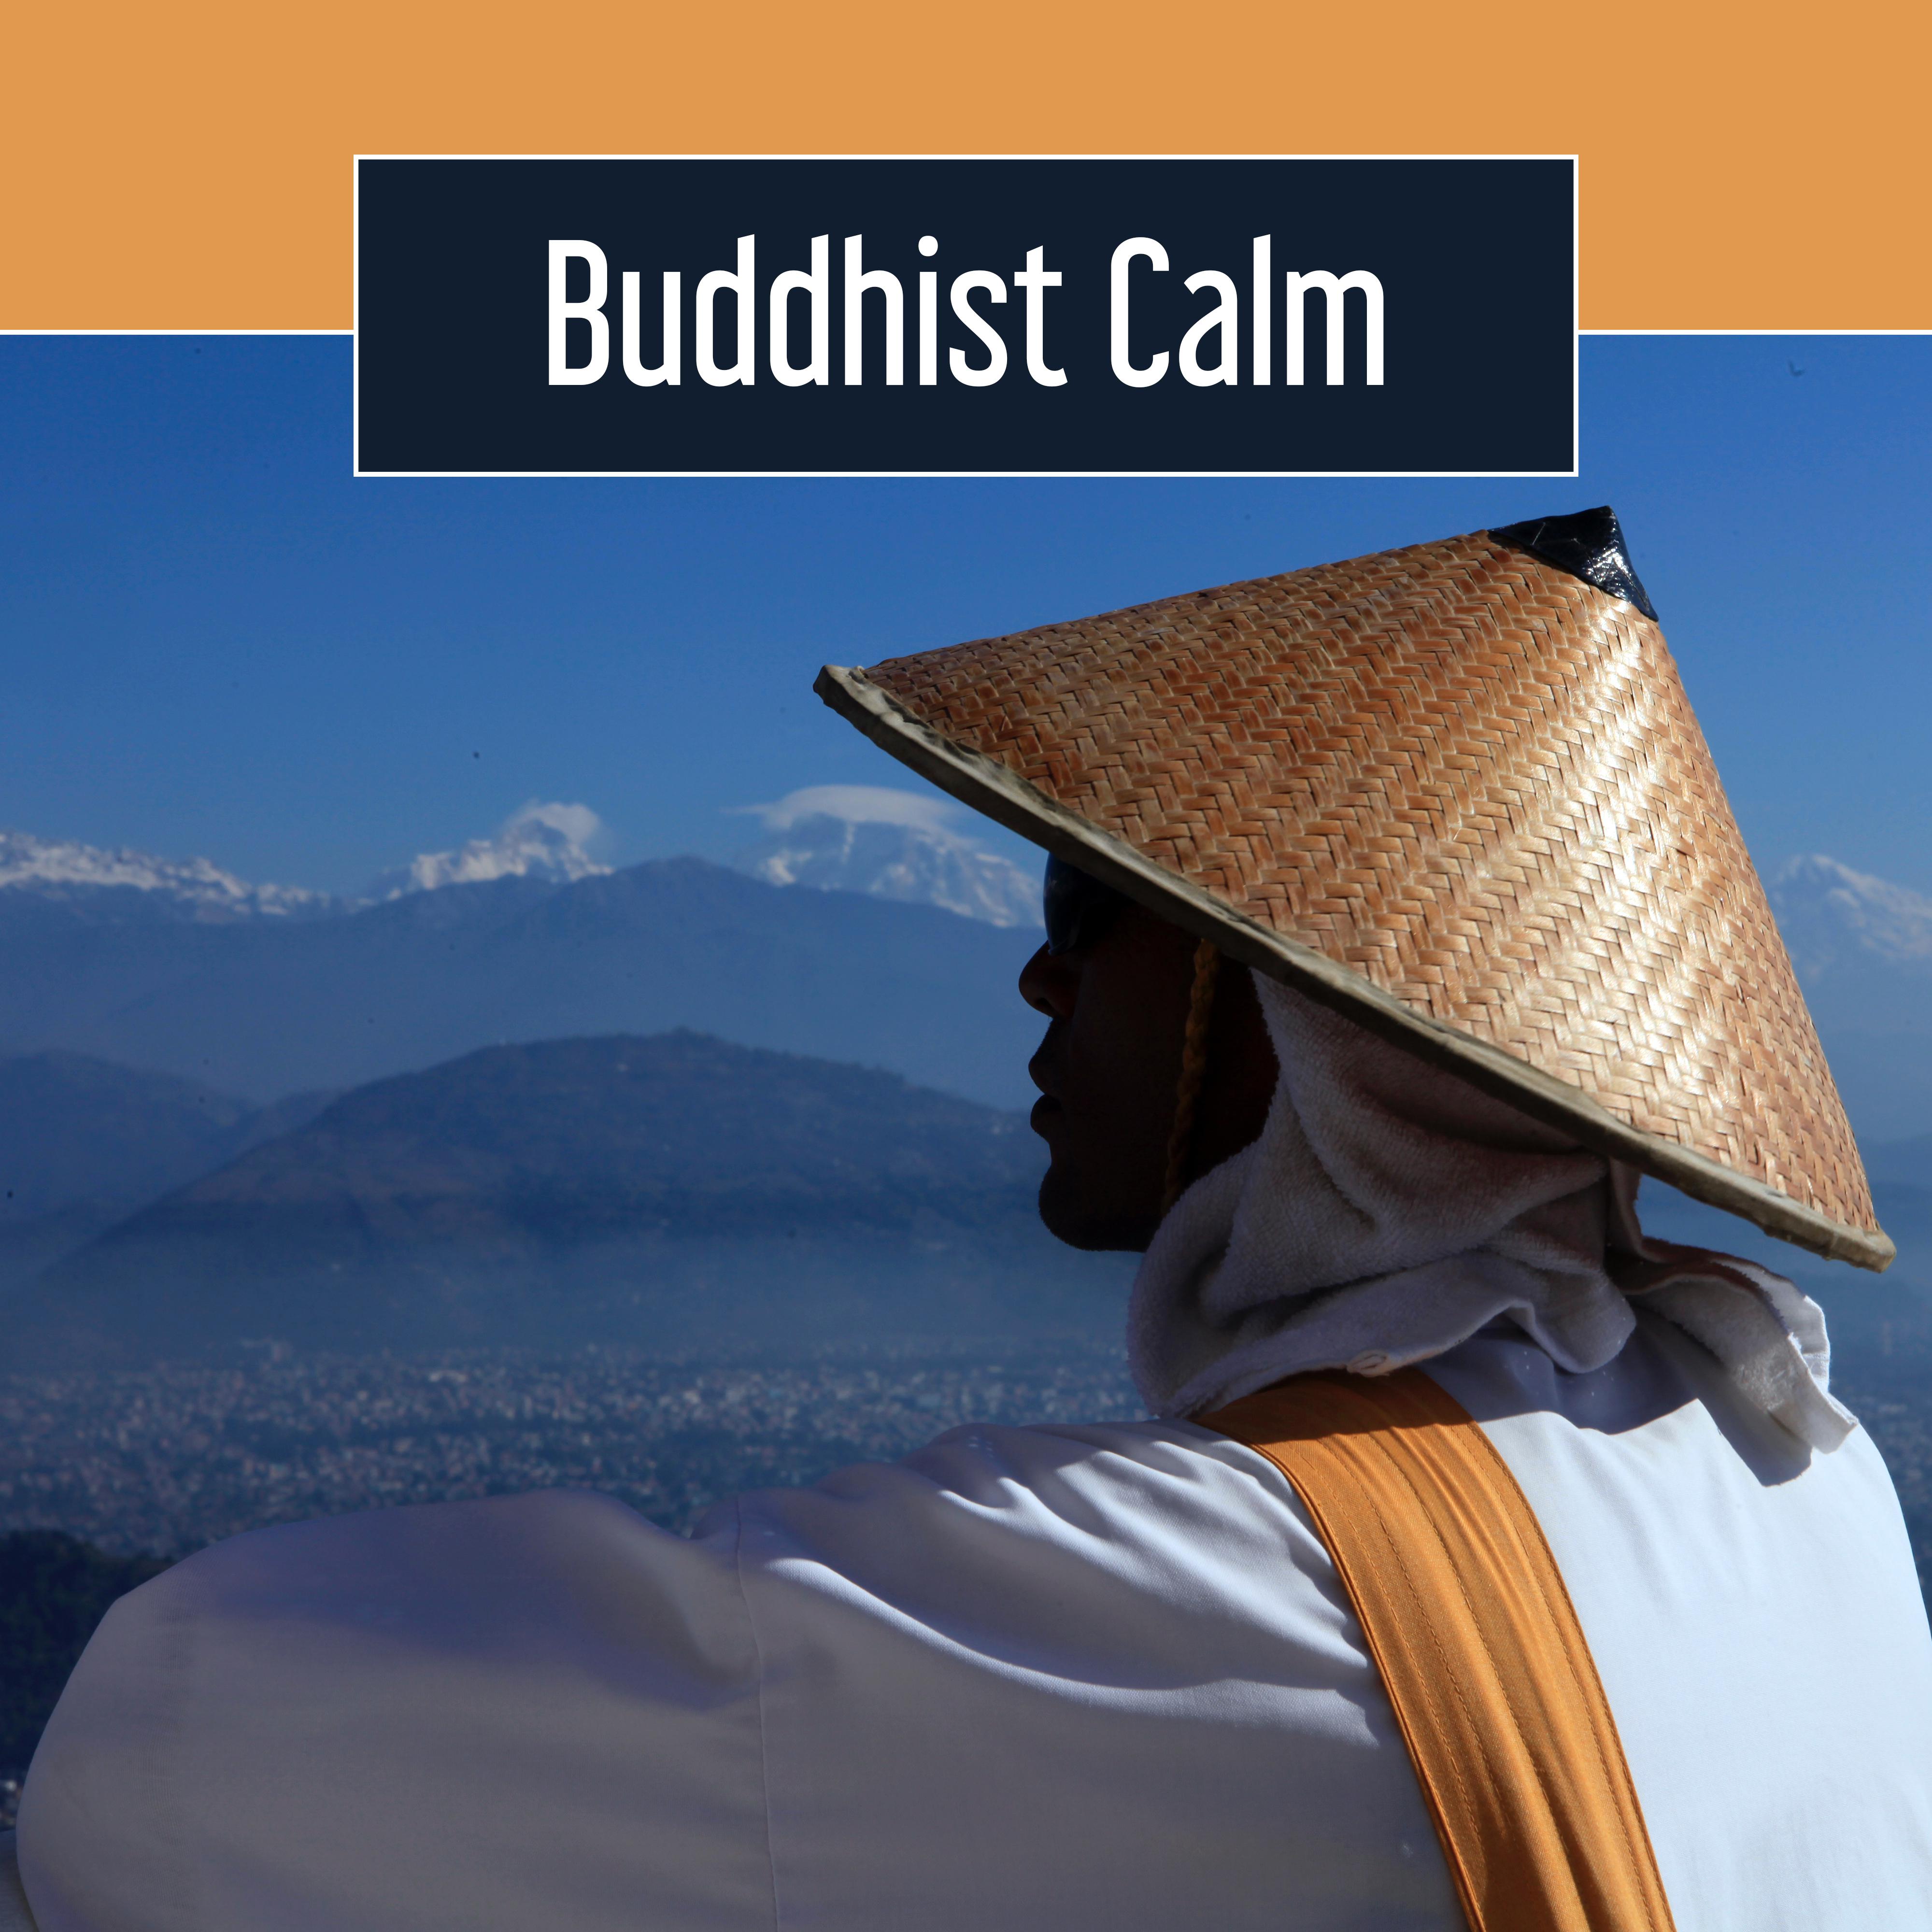 Buddhist Calm – Relaxing Music for Yoga, Meditation, Calmness for Soul, Tibetan Sounds, Better Concentration, Train Your Mind, Harmony